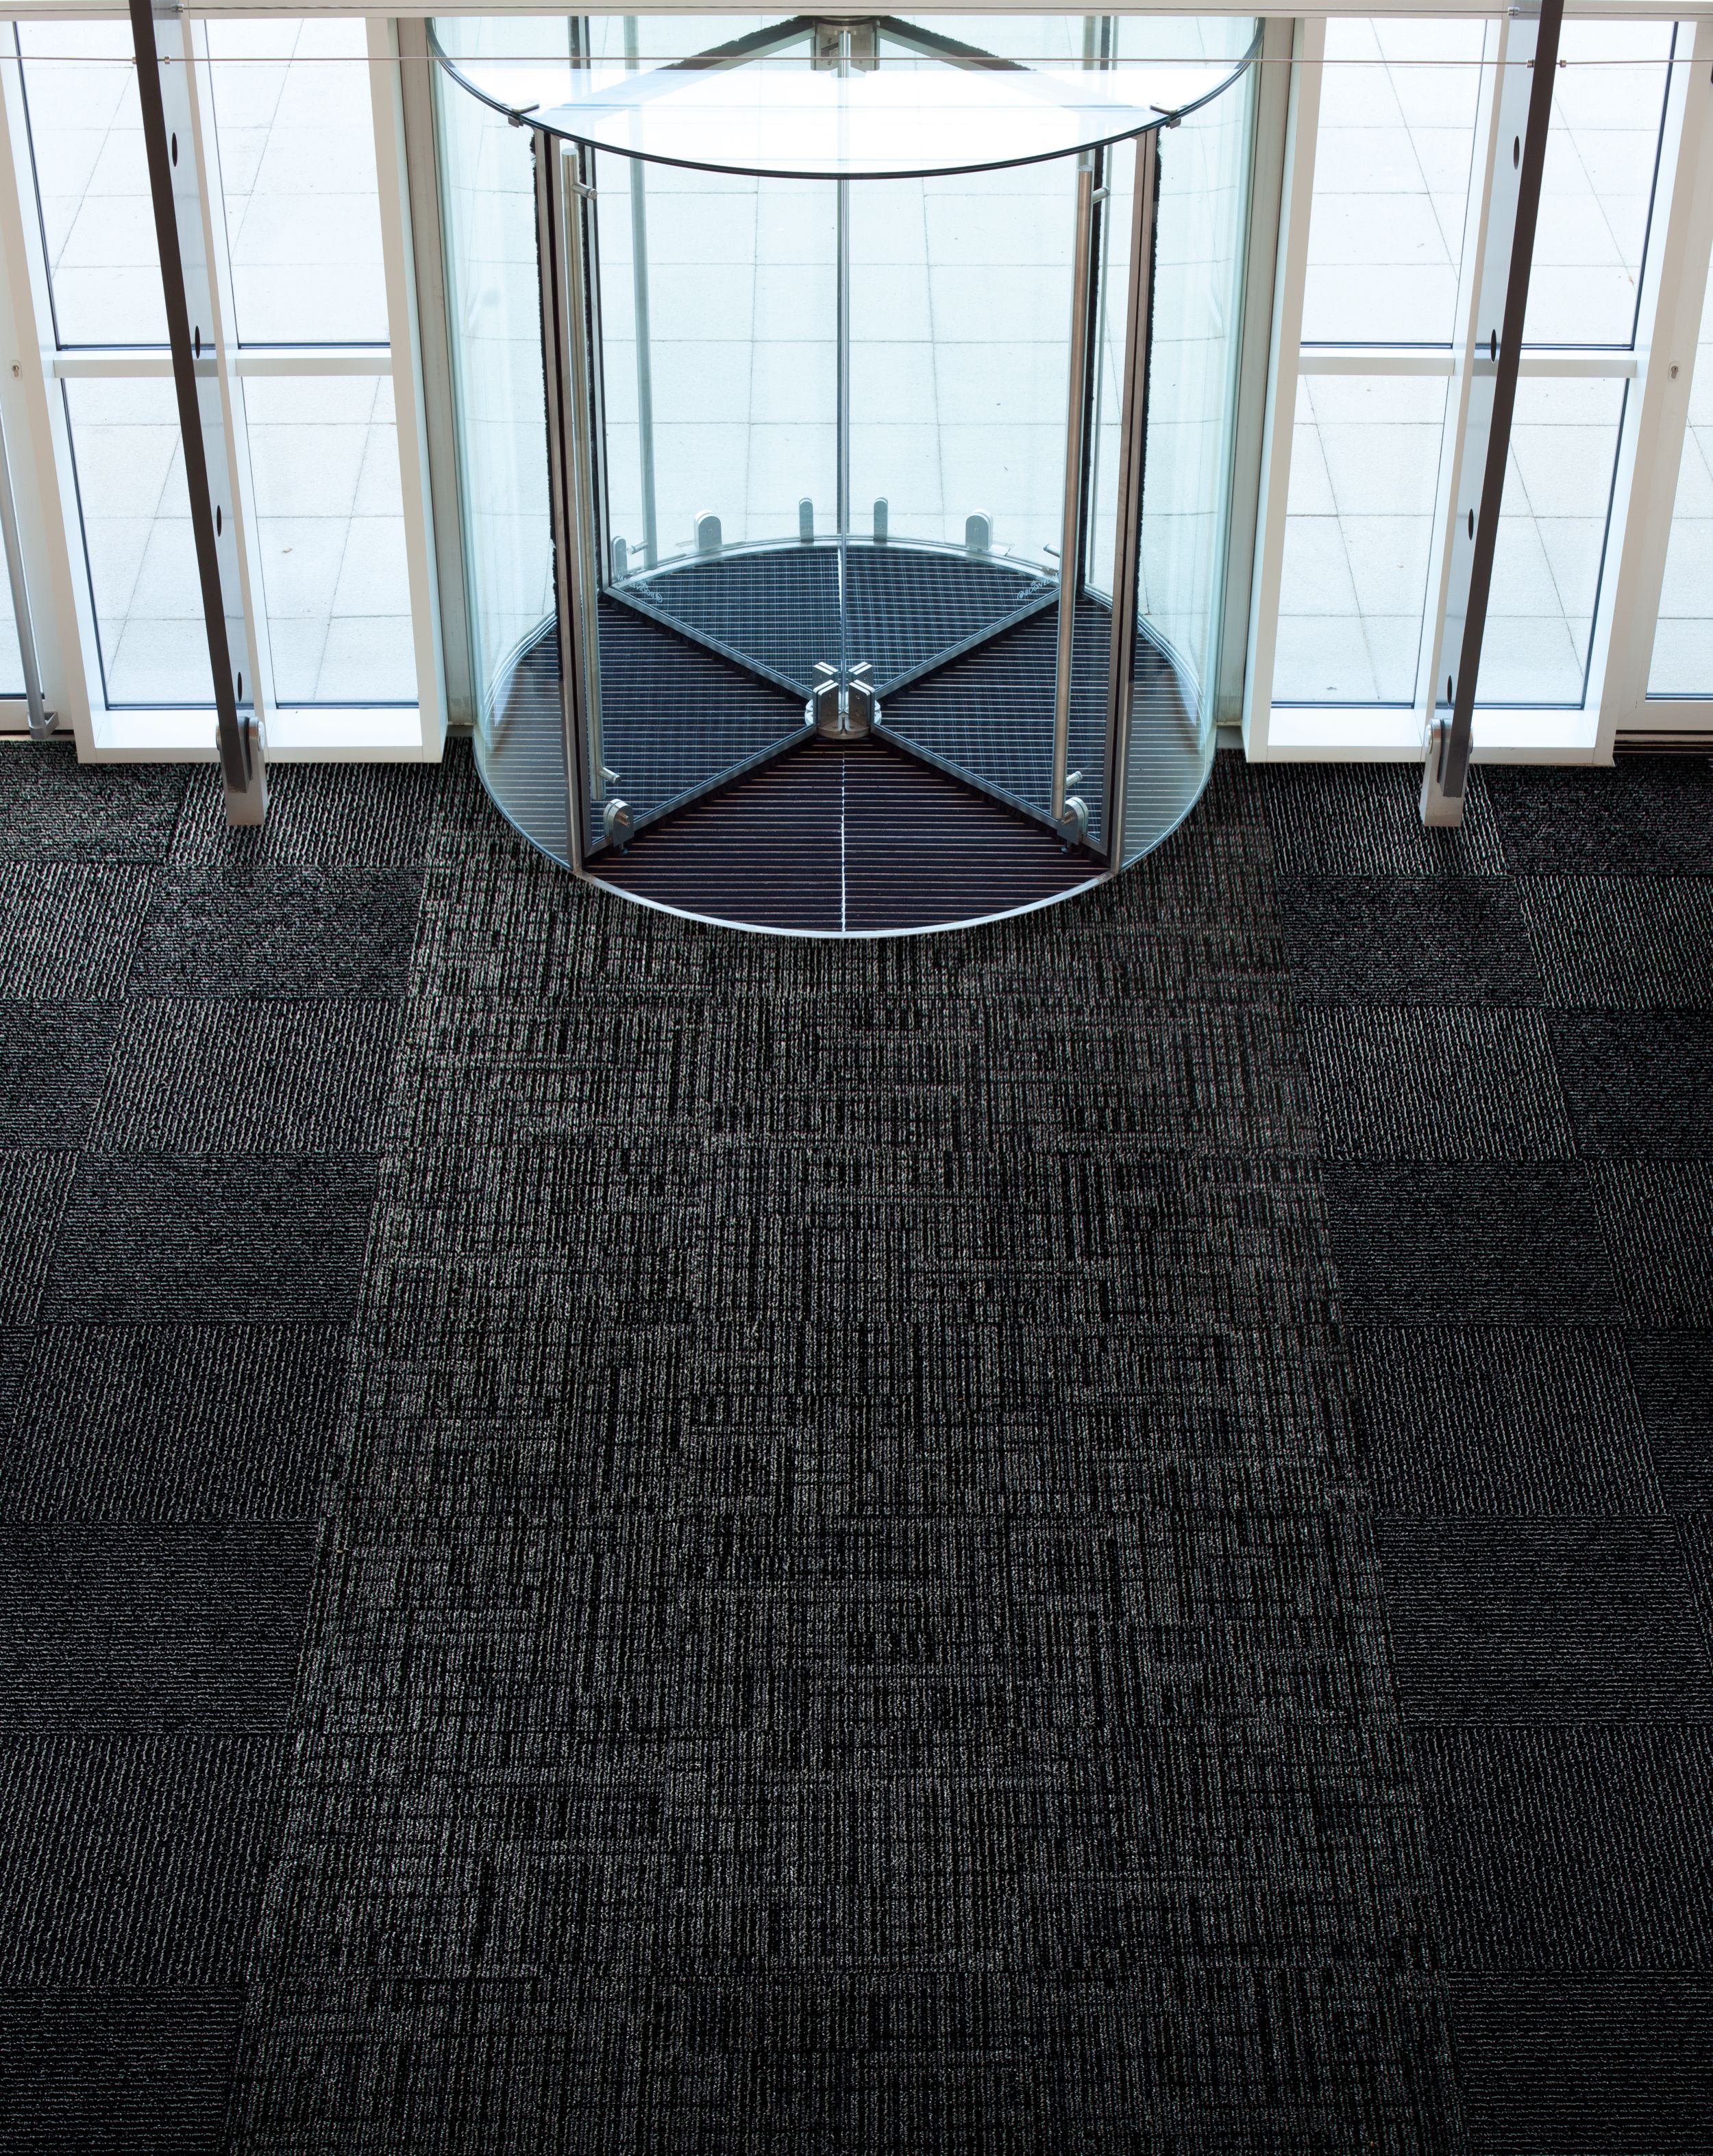 Interface SR699 and SR899 carpet tile in entryway with revolving door numéro d’image 5